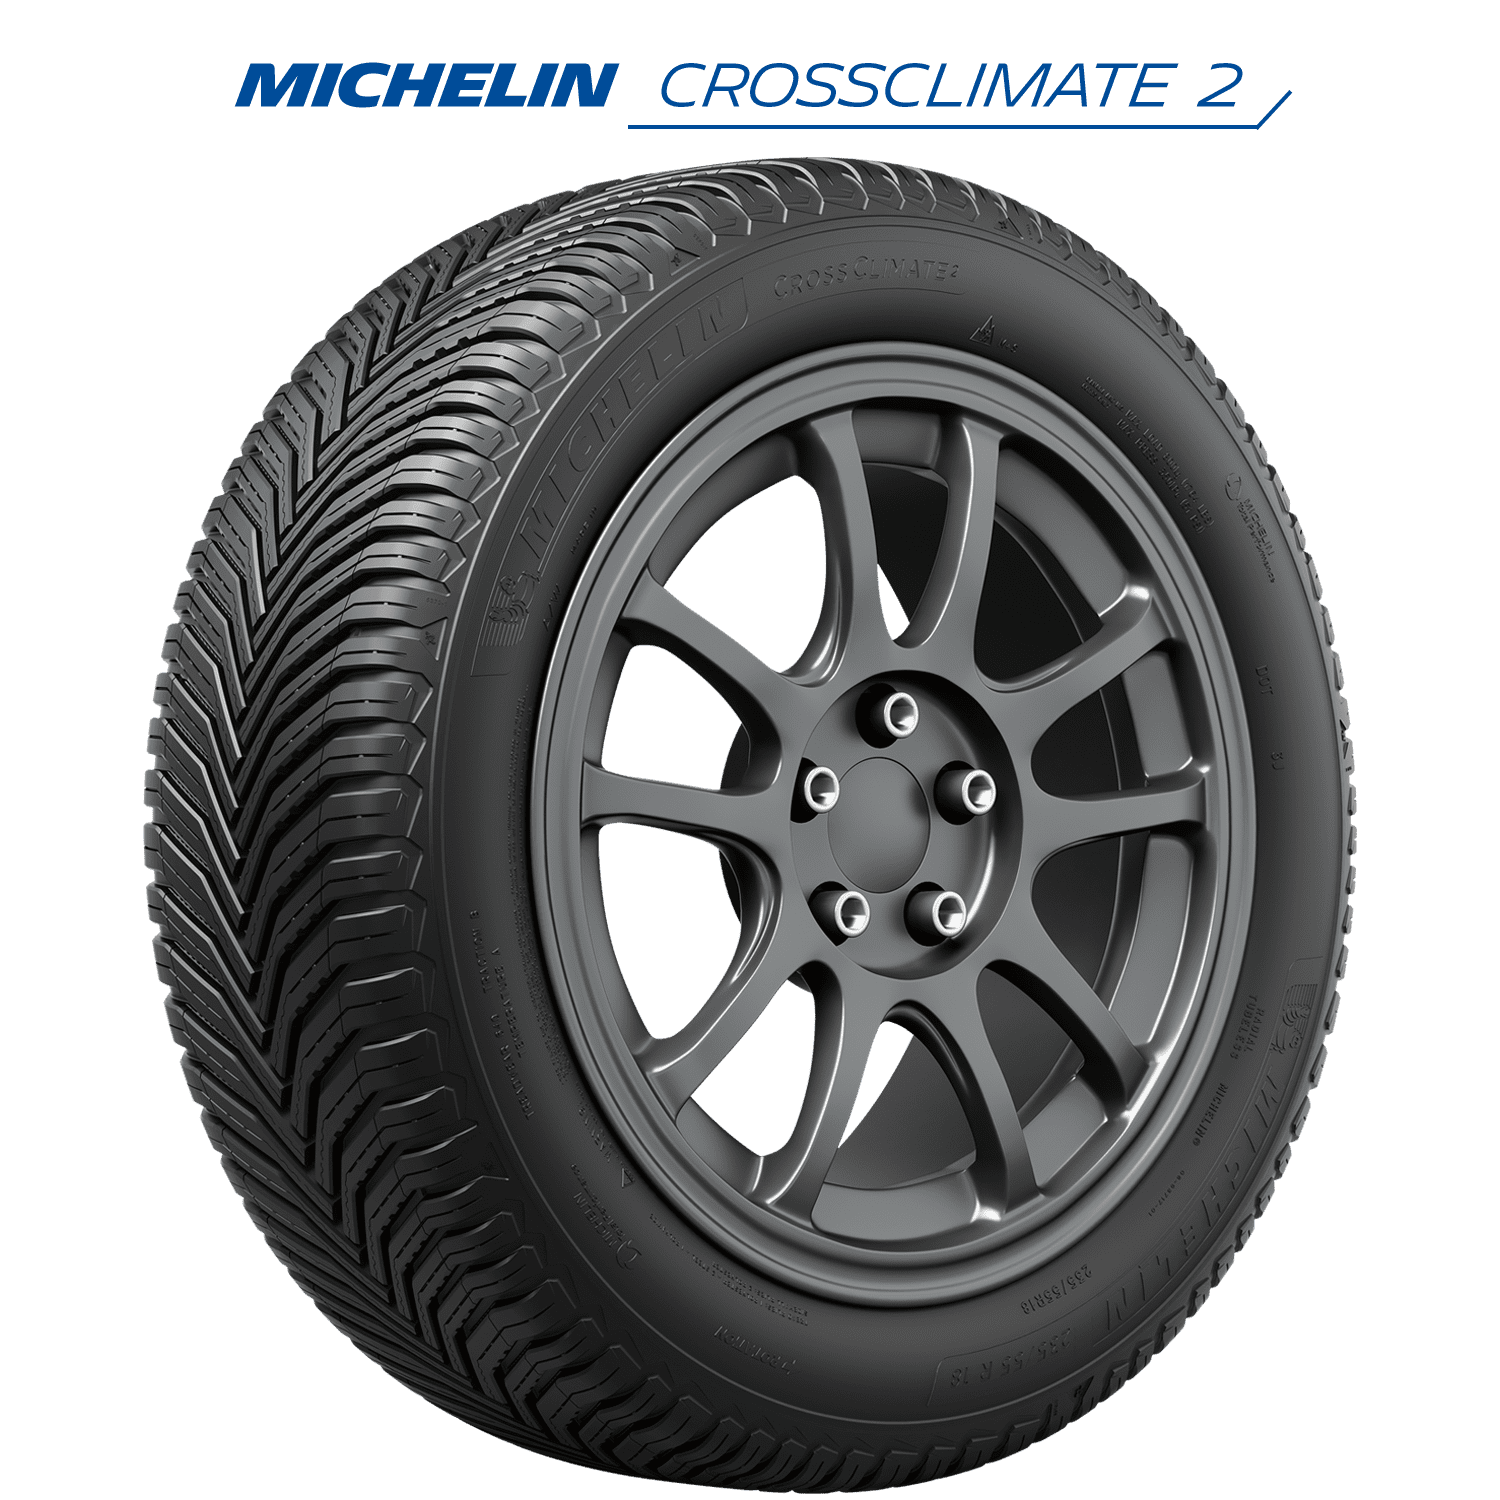 MICHELIN CROSS CLIMATE 205 55 16 2055516 94V XL BRAND NEW  FUEL C WET B 2 TYRE